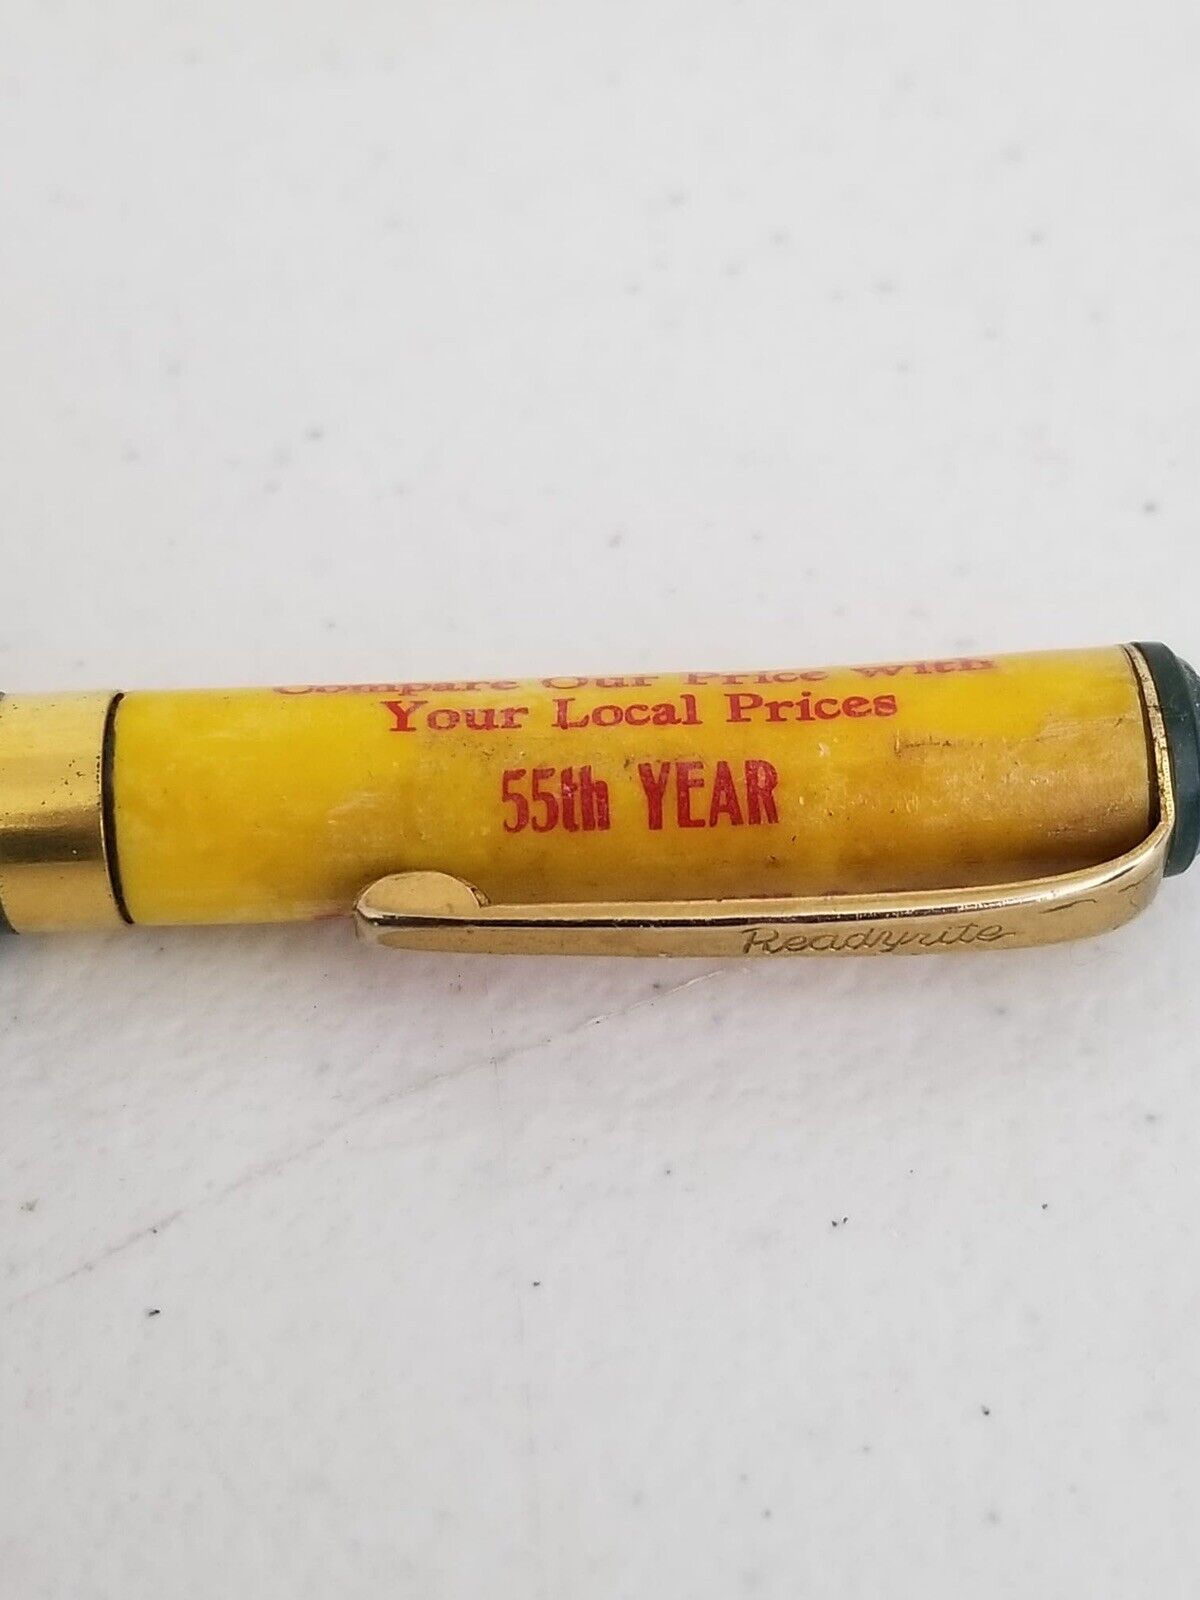 Collectible Vintage Readyrite Mechanical Pencil – Lakeville Creamery Advertising Promo - 55th Year Anniversary Edition - TreasuTiques